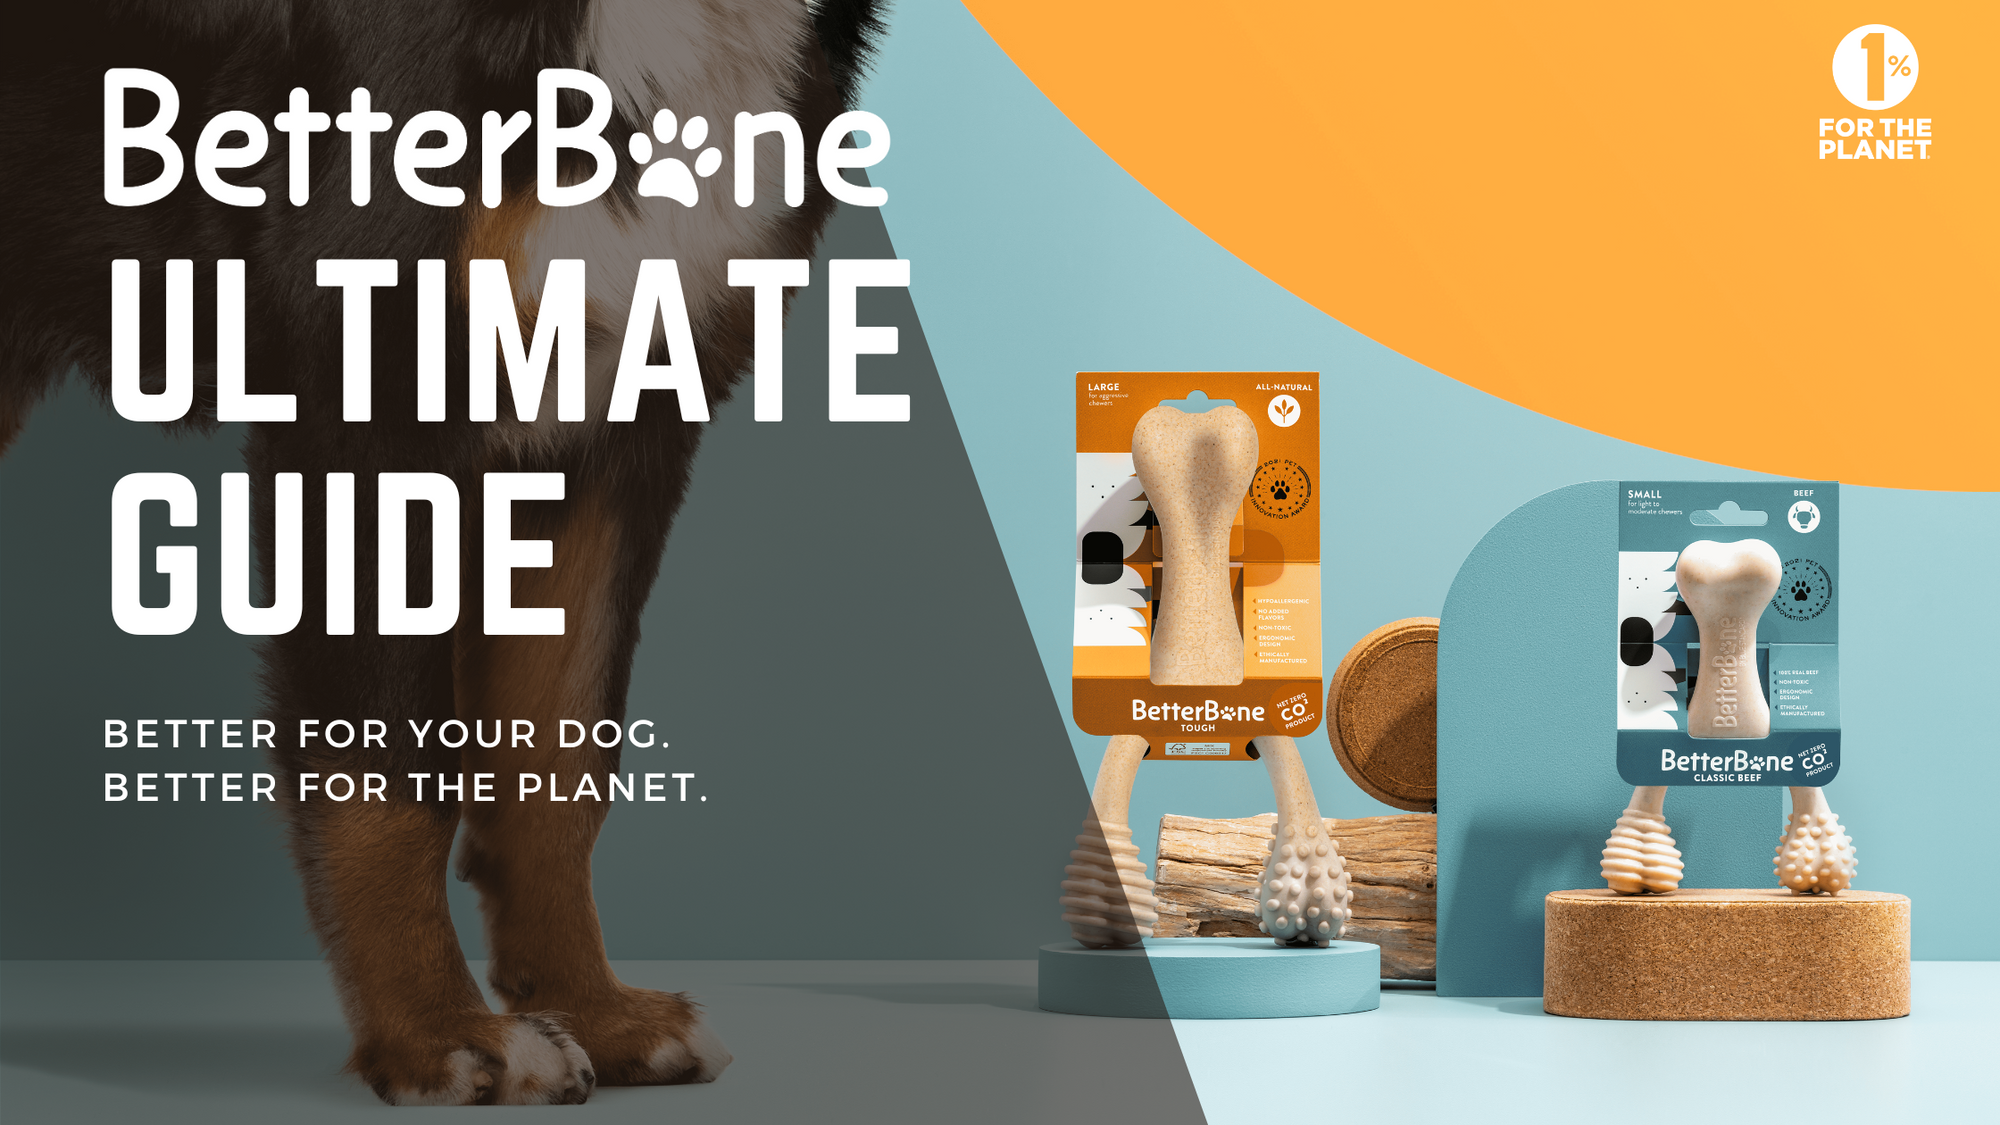 BetterBone Ingredients: Your Ultimate Guide to Natural, Food-Grade, Sustainable, and CO2 Emission-Reducing Dog Chews